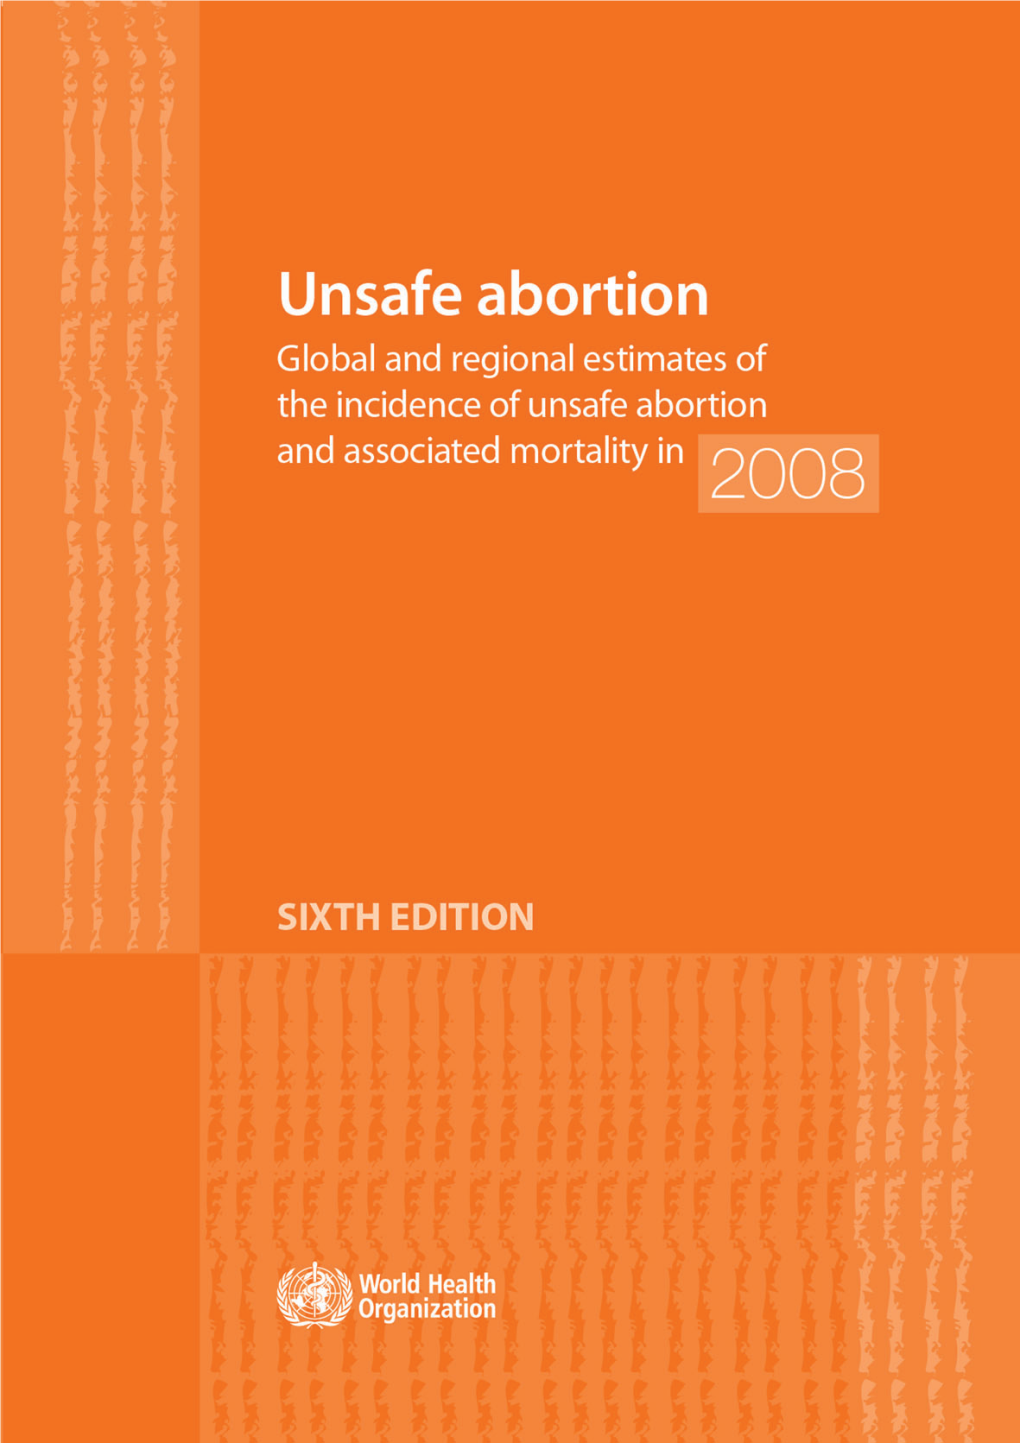 Unsafe Abortion: Global and Regional Estimates of the Incidence of Unsafe Abortion and Associated Mortality in 2008